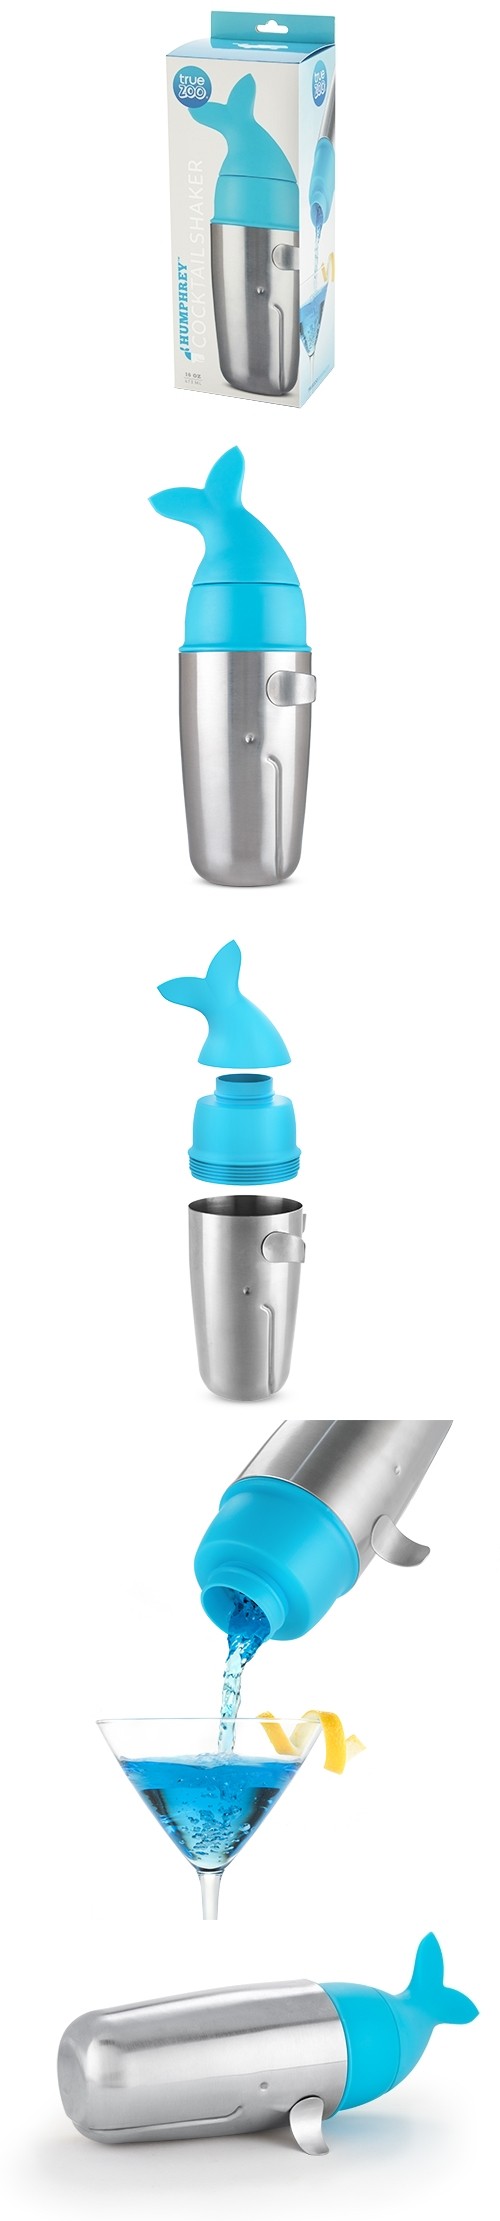 Humphrey: Whale Cocktail Shaker by TrueZOO